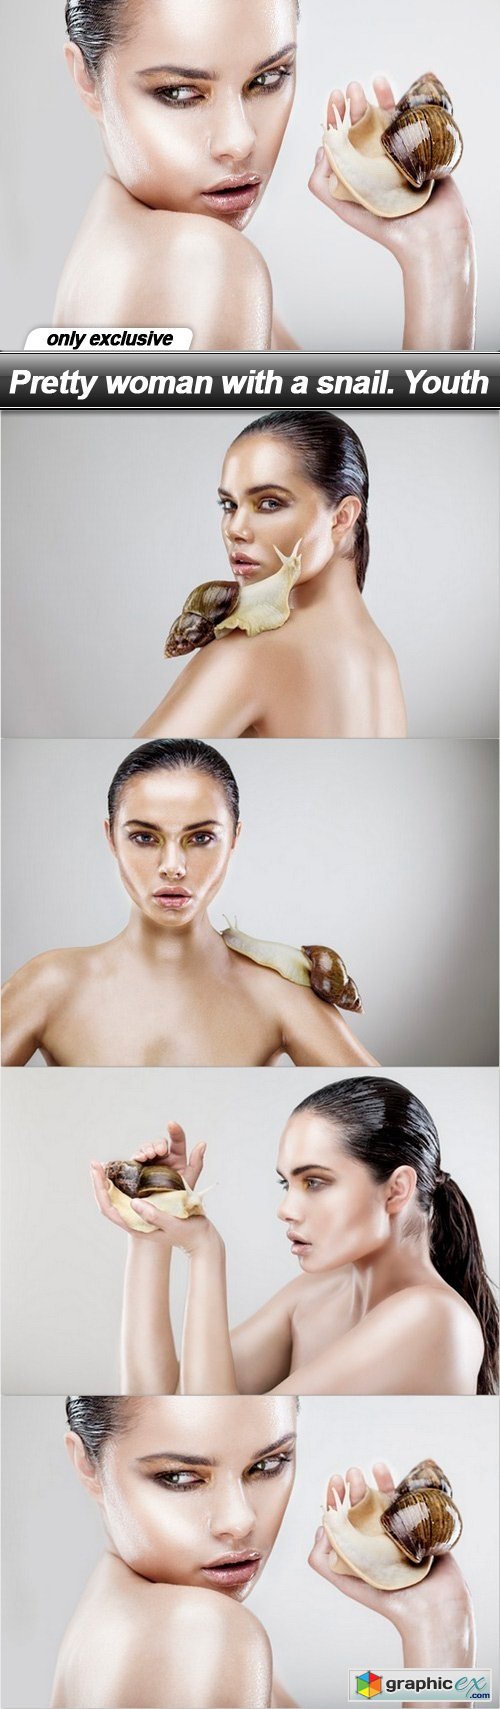 Pretty woman with a snail. Youth - 4 UHQ JPEG